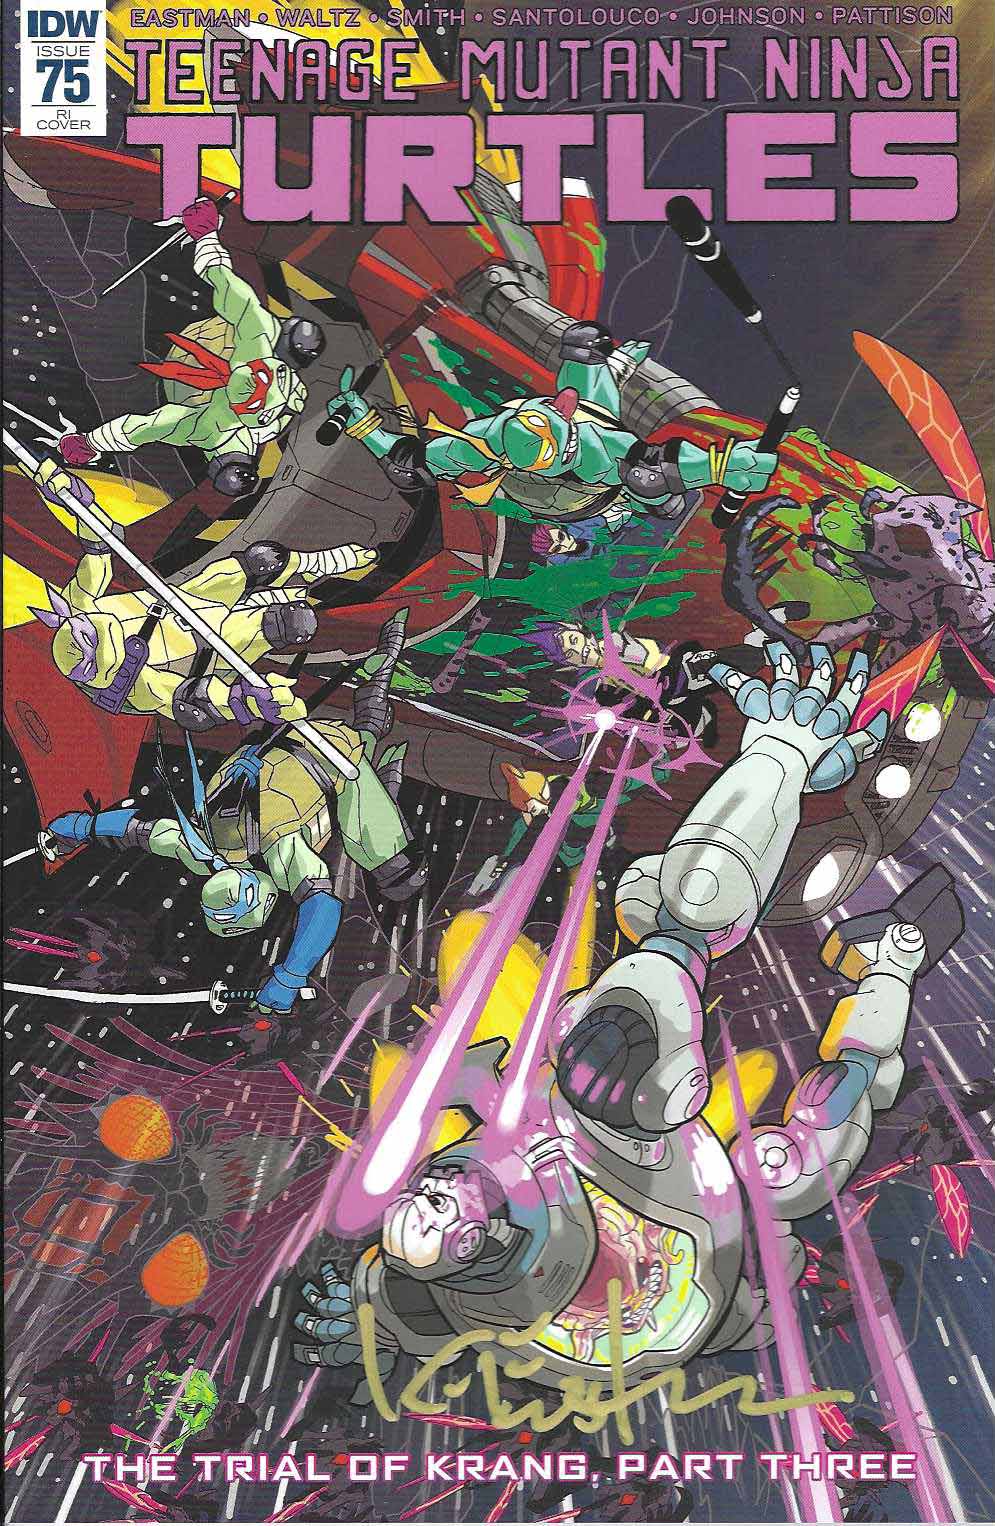 TMNT Issue #75 Retailer 1:10 Variant – Signed